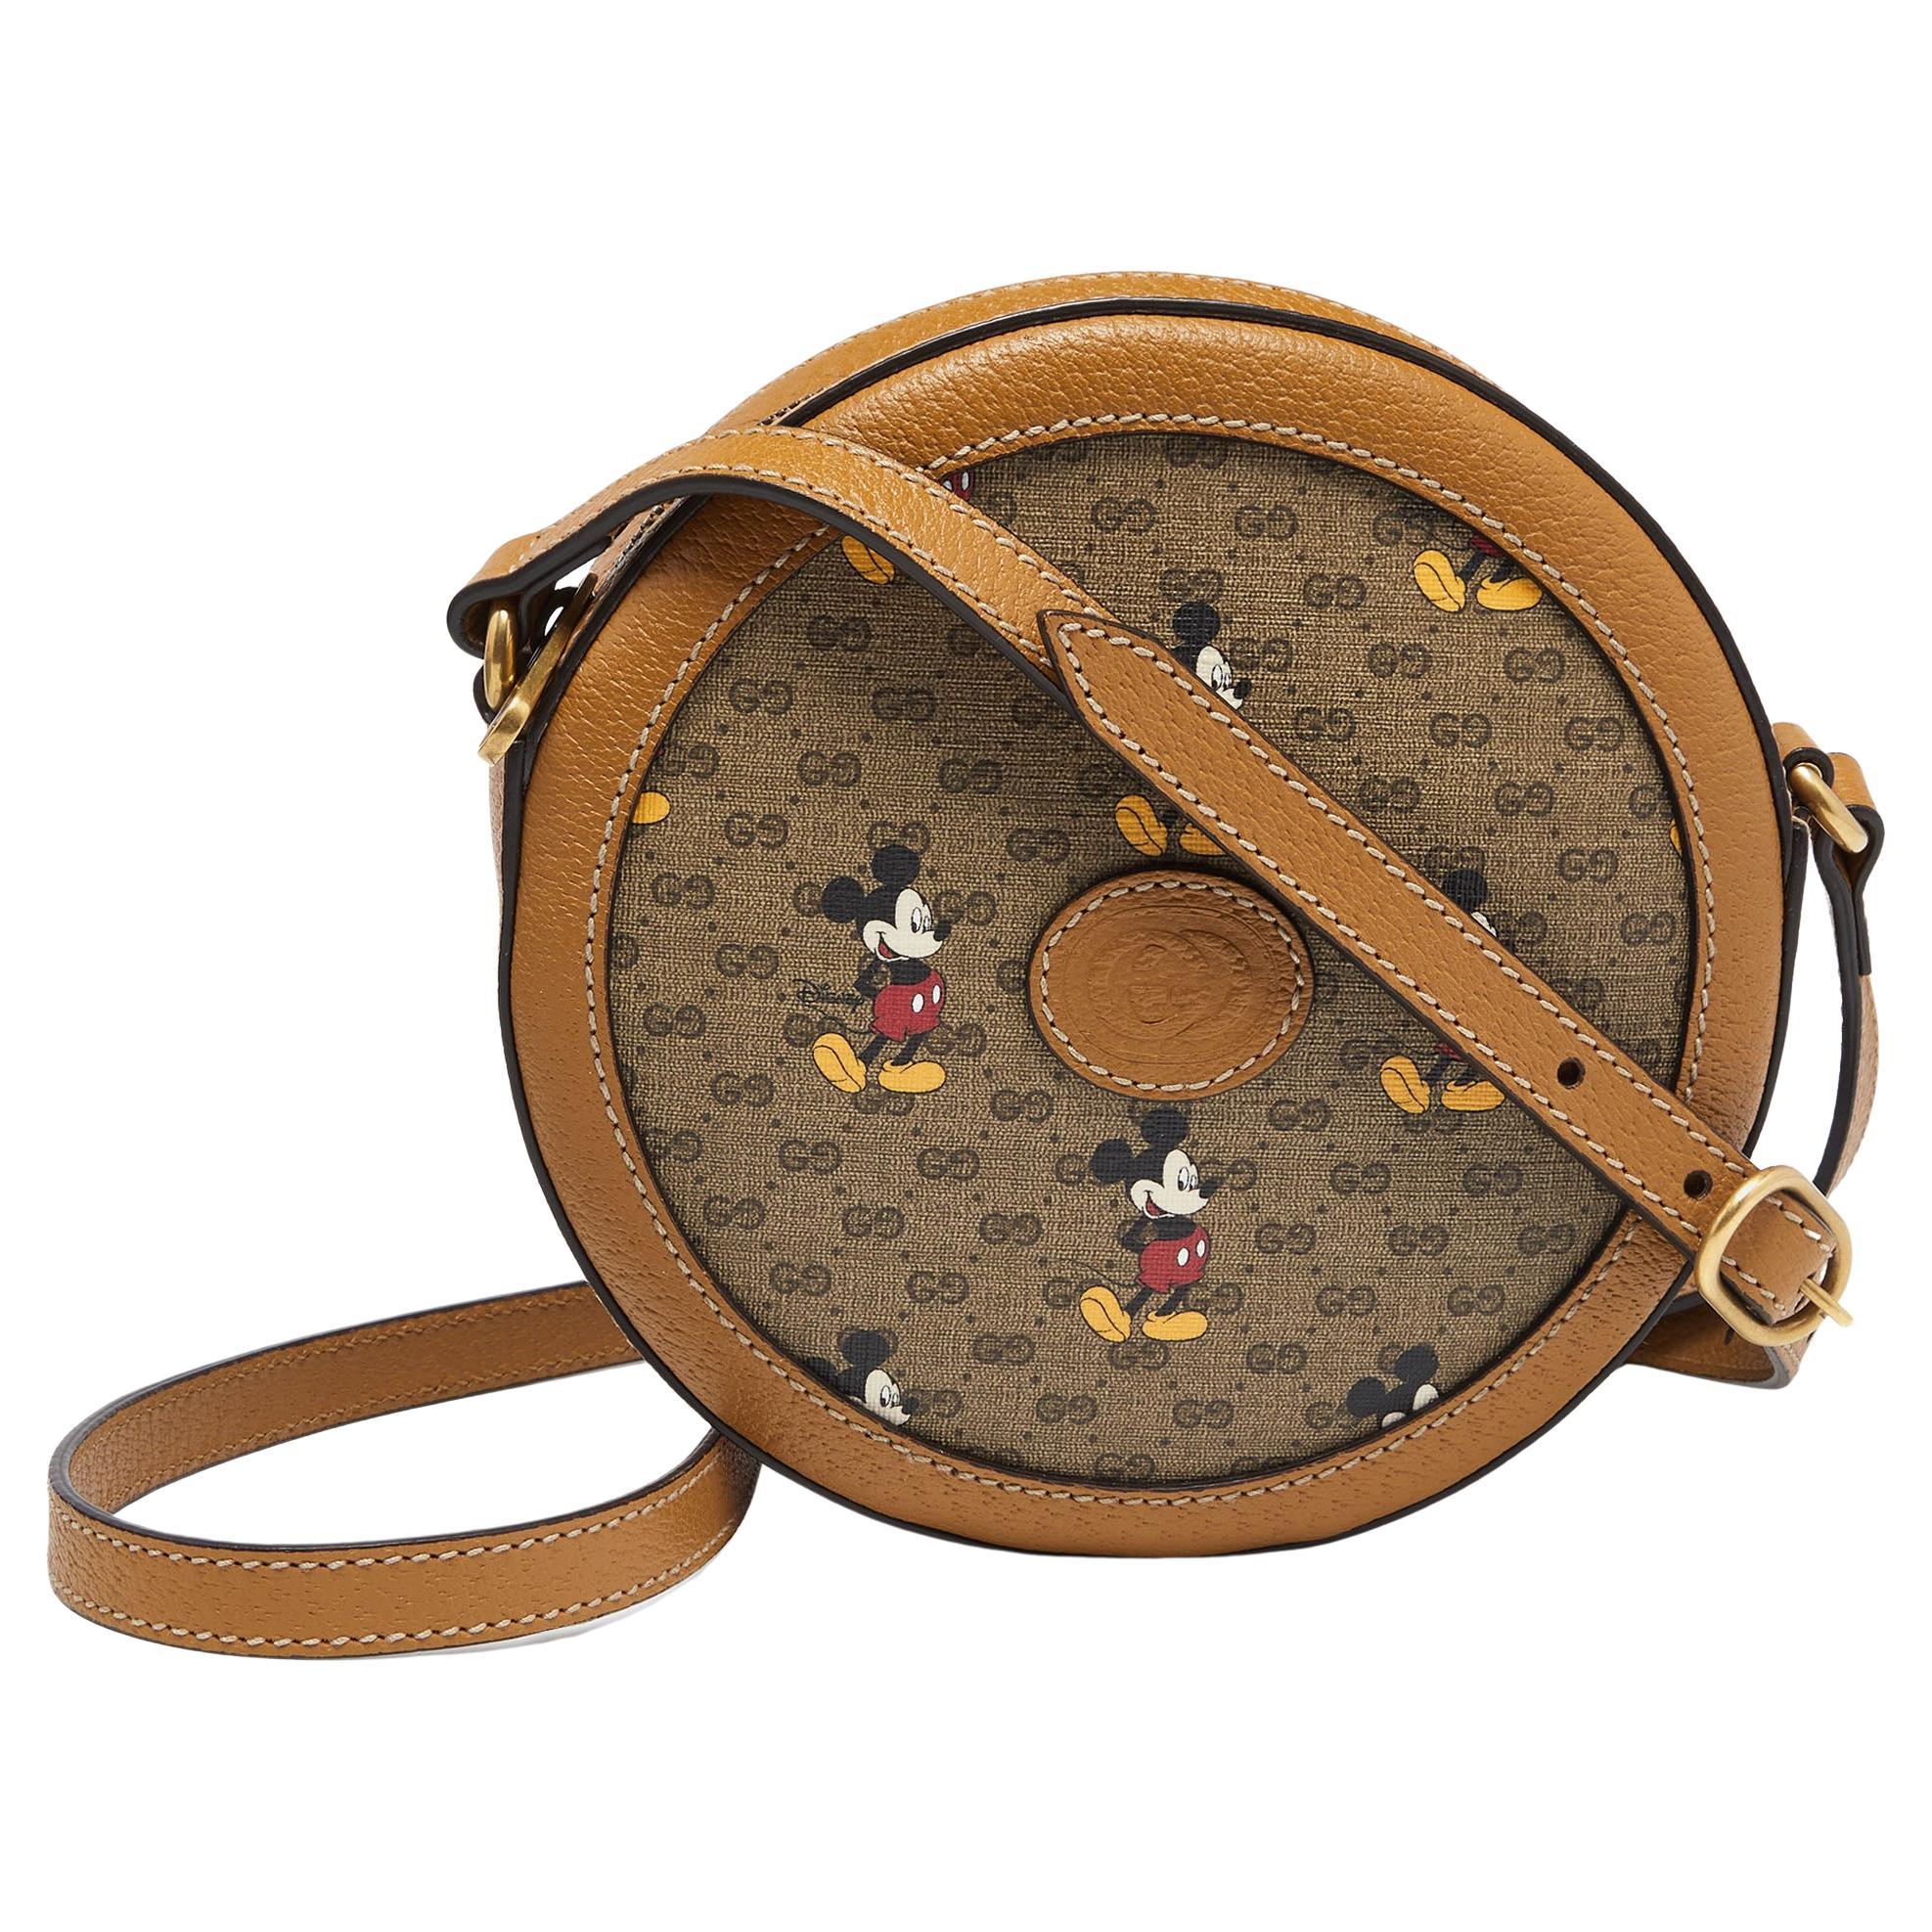 Gucci x Disney GG Supreme Canvas and Leather Round Crossbody Bag